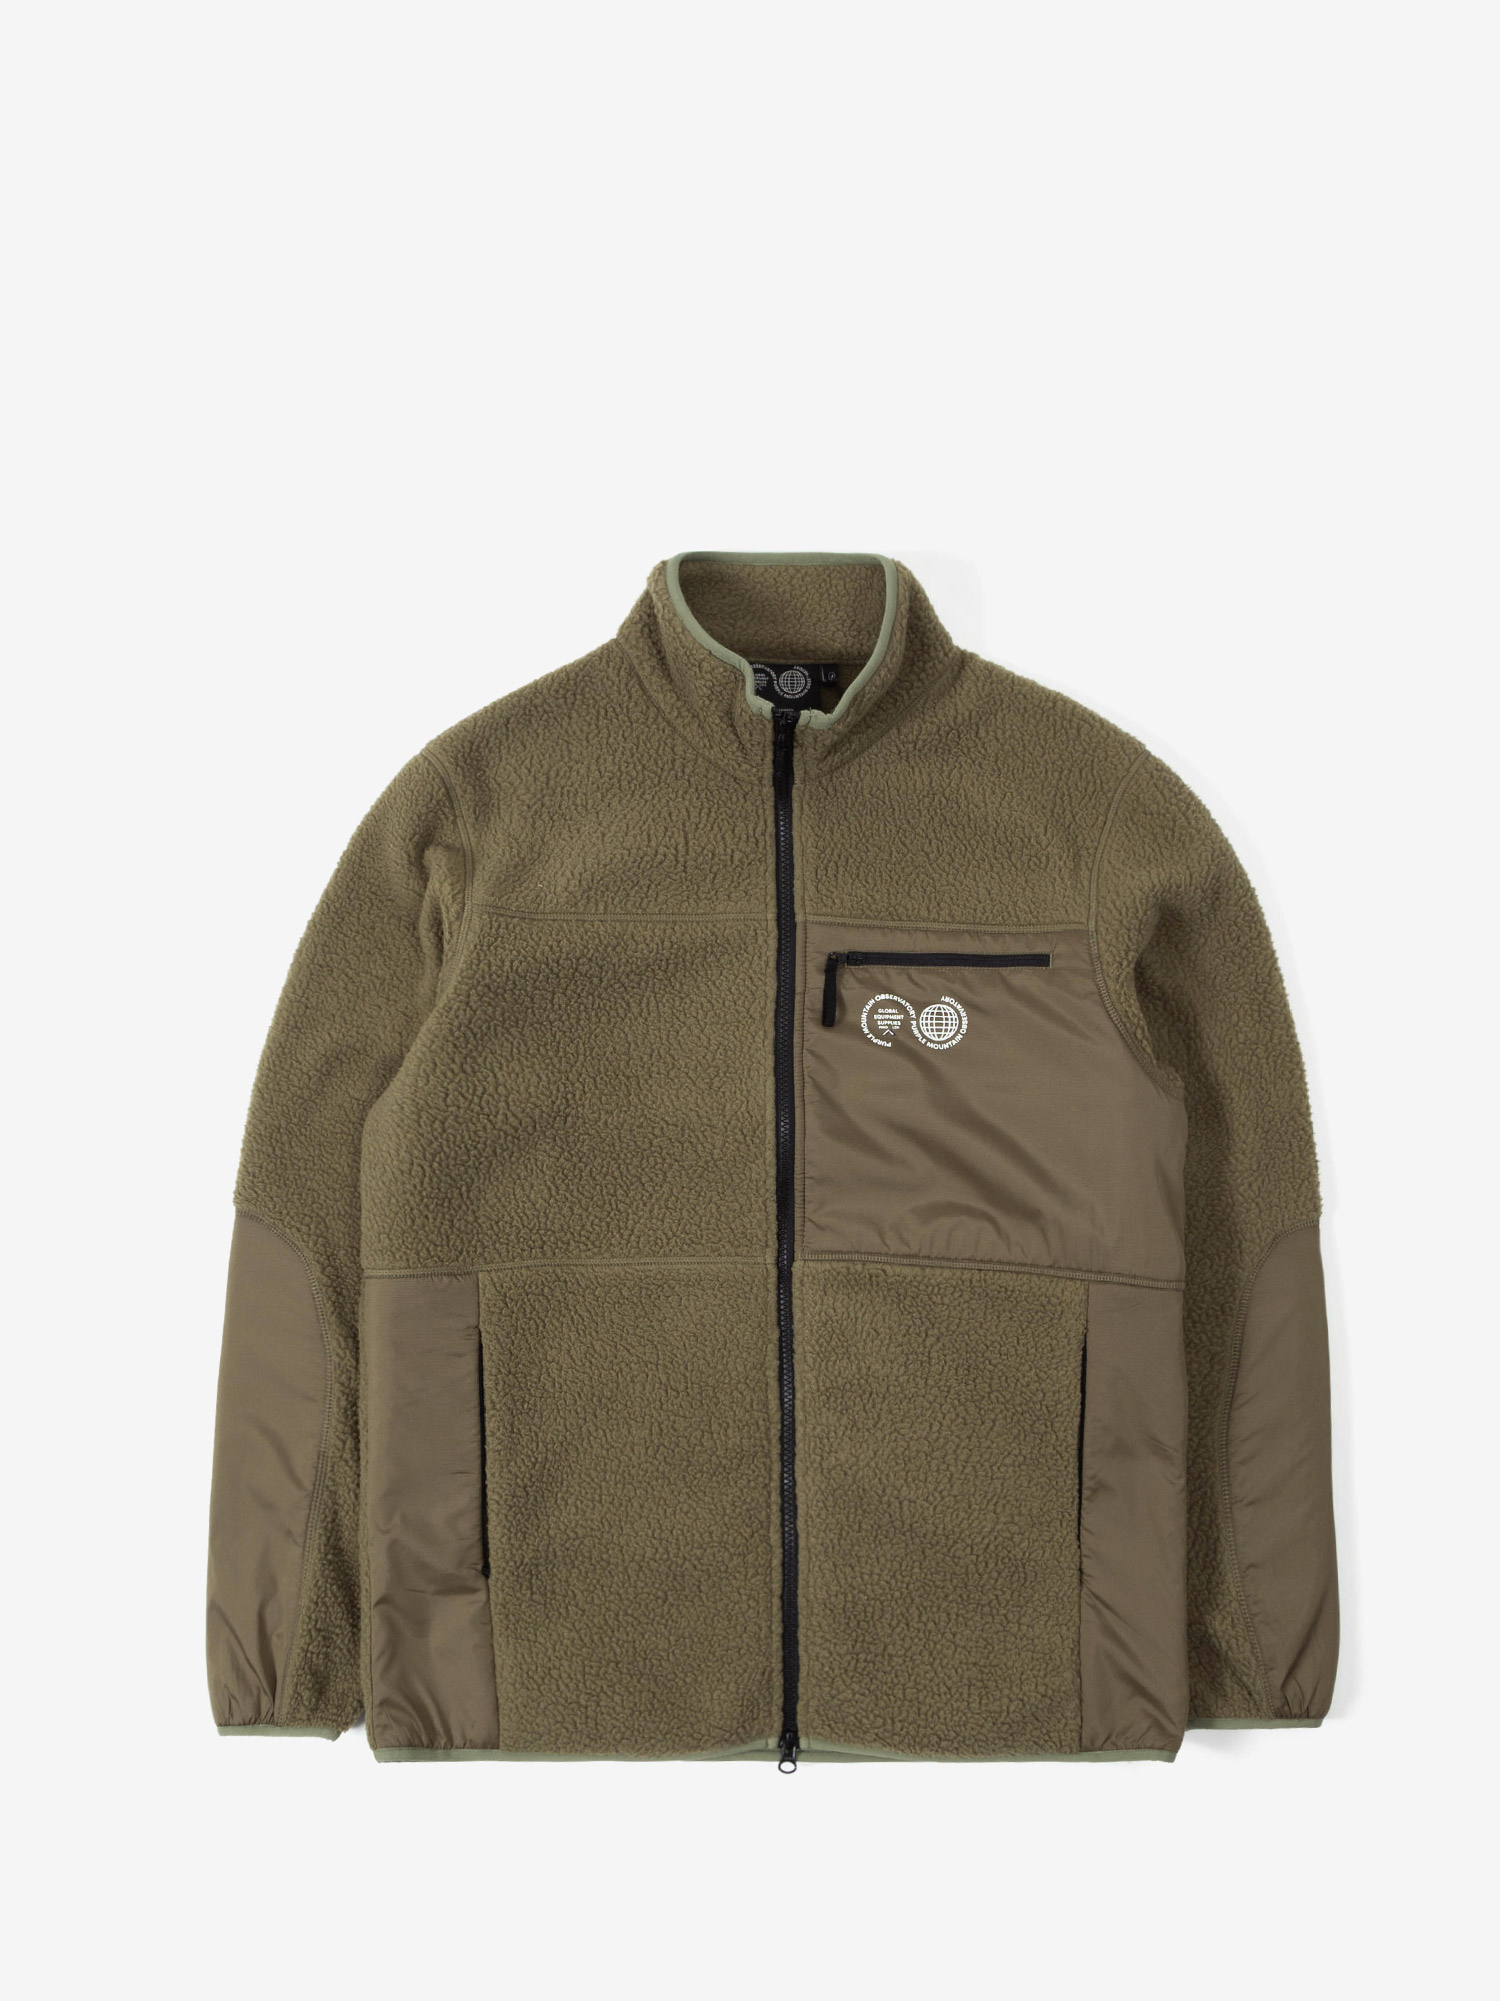 Featured image for “BORG ZIP THROUGH FLEECE BURNT OLIVE”